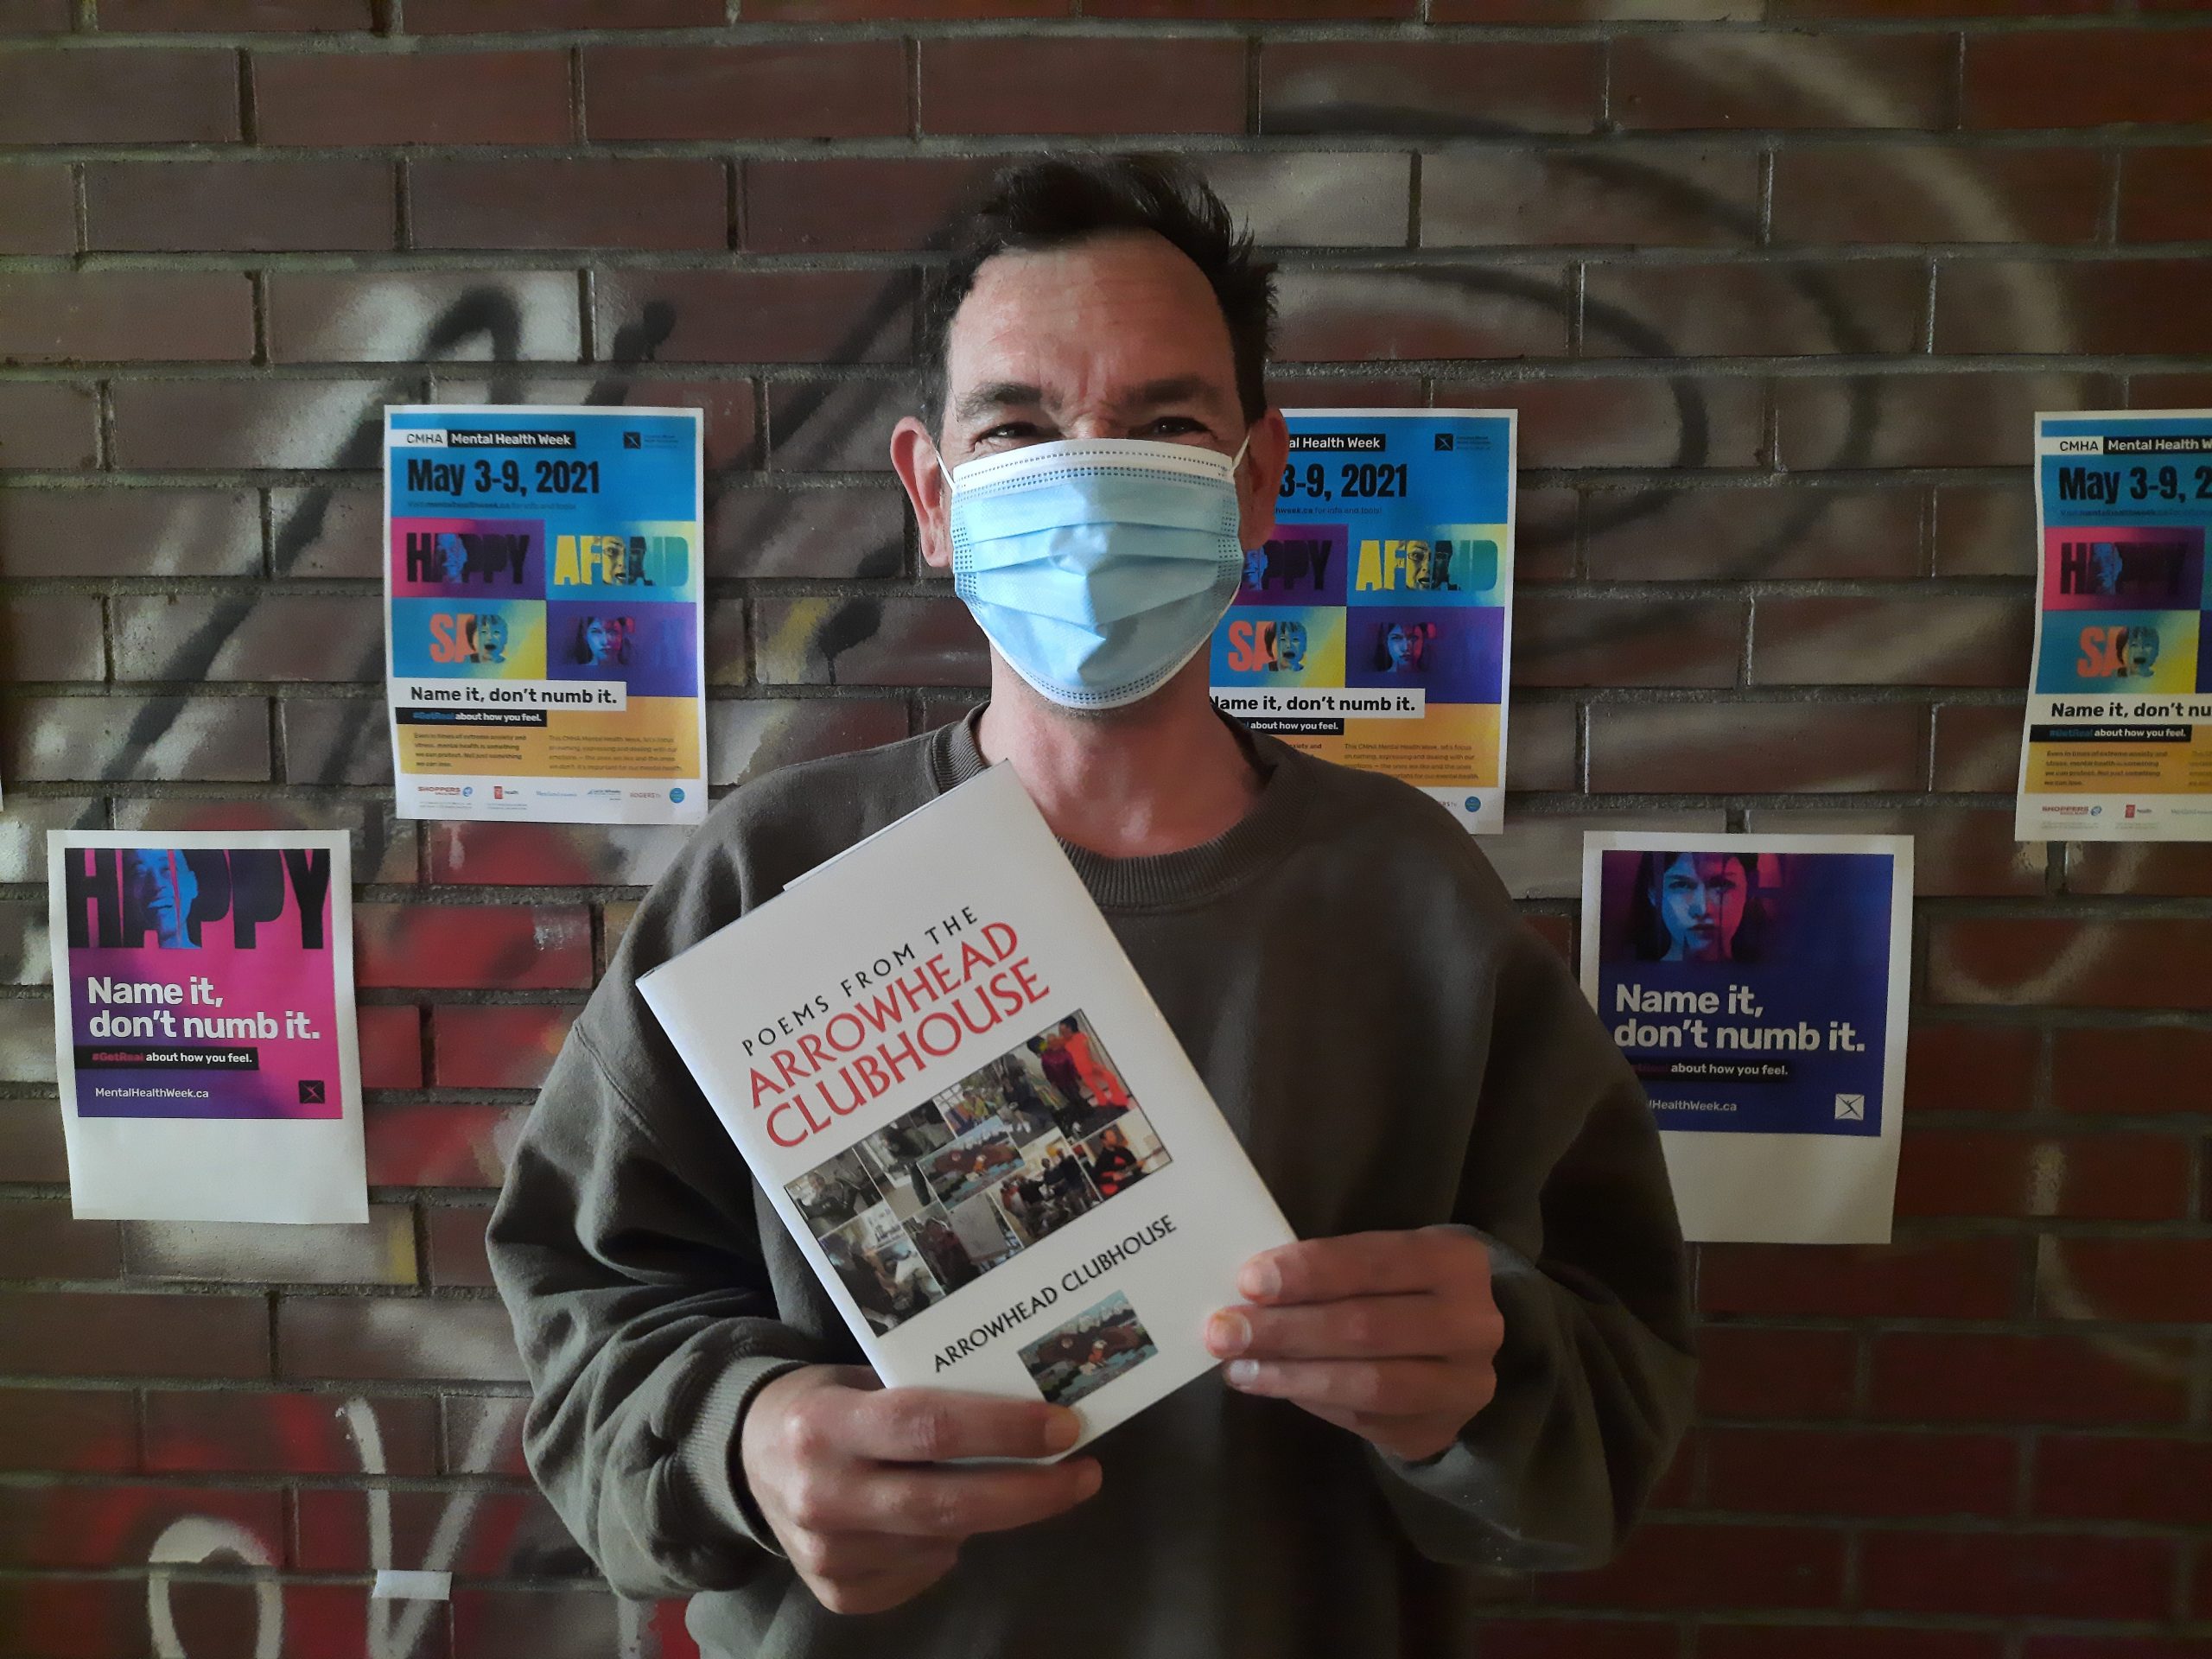 A man in a mask holds a book that says "Poems from the Arrowhead Clubhouse", against a brick wall with posters on it.